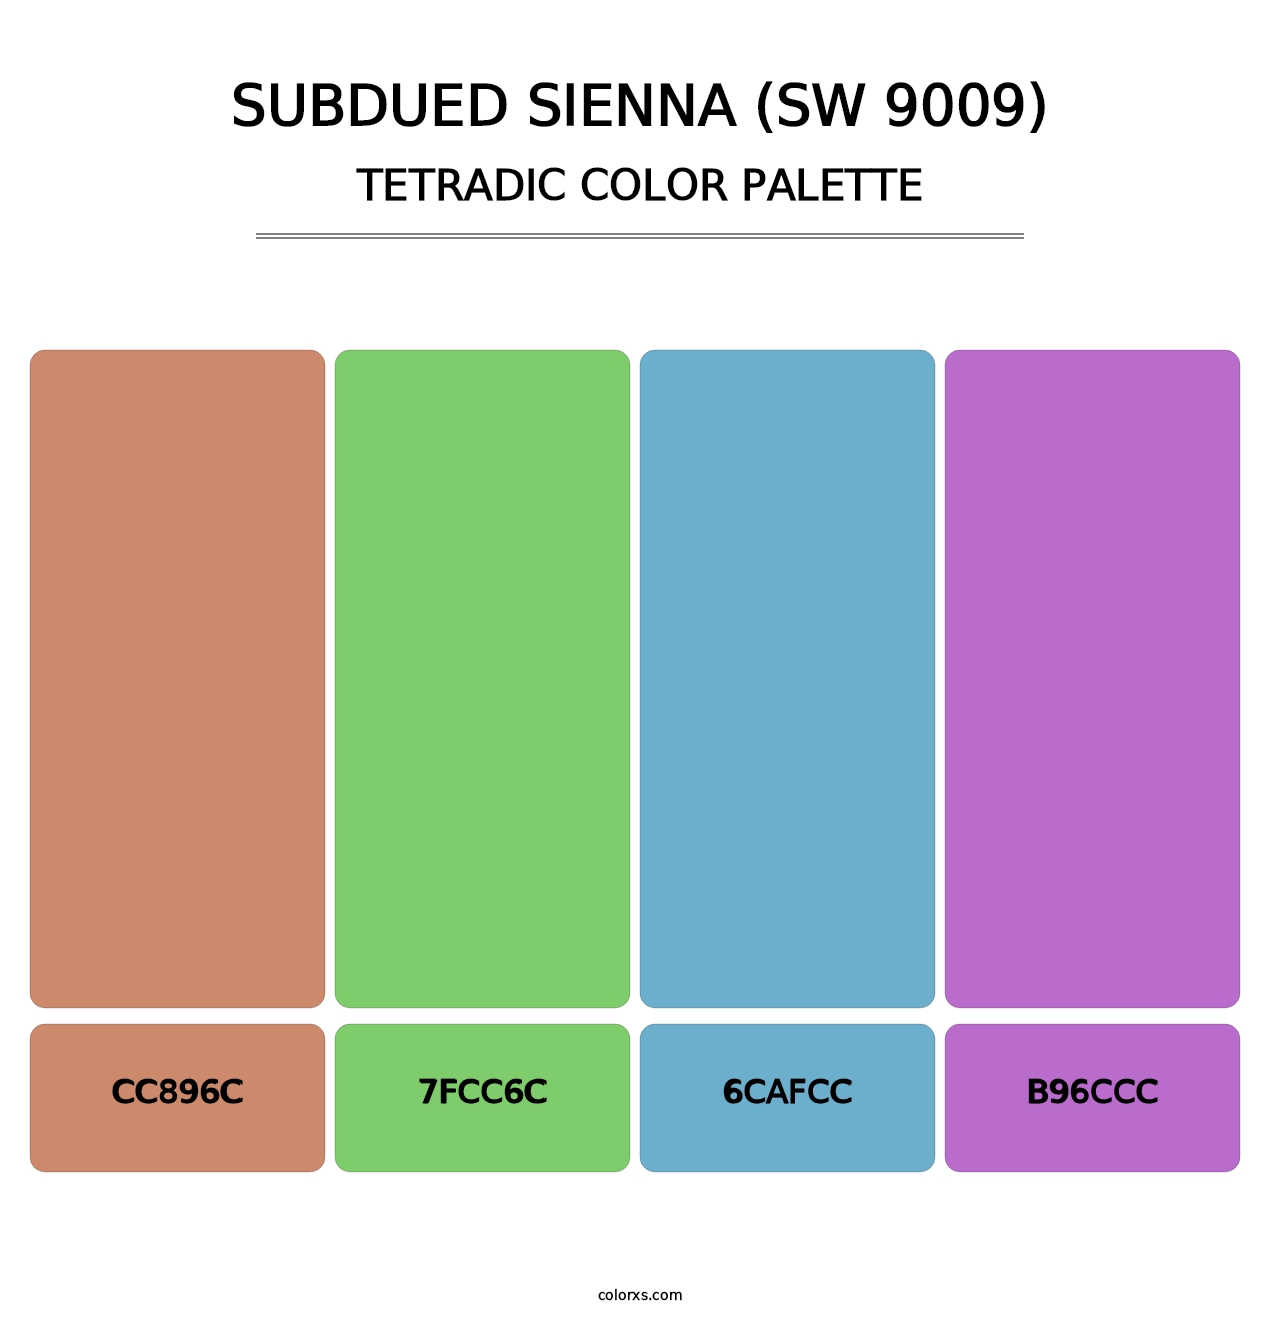 Subdued Sienna (SW 9009) - Tetradic Color Palette